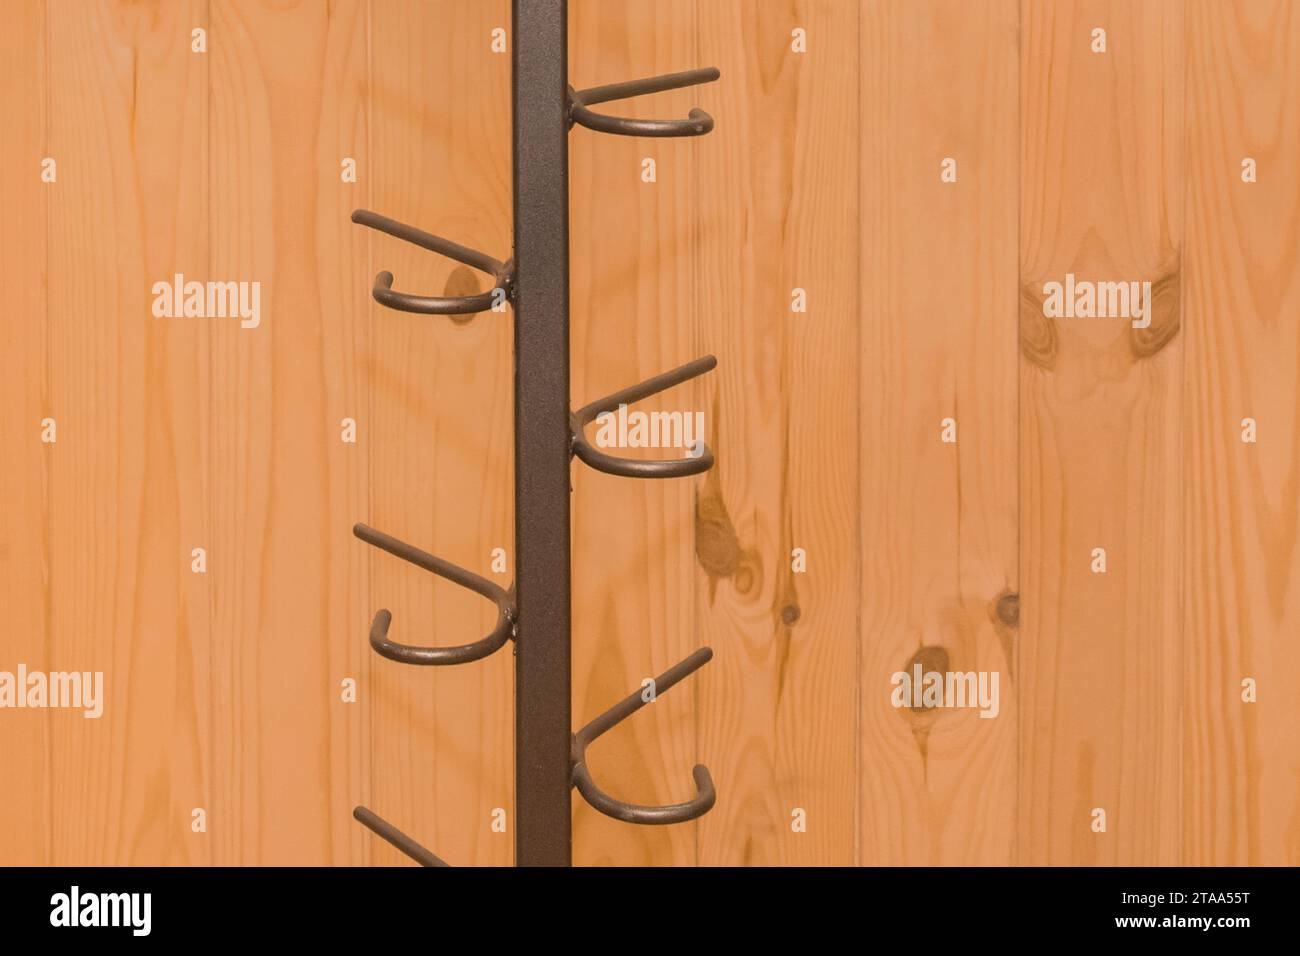 Metal structure clothes hanger hooks on wooden background close-up. Stock Photo